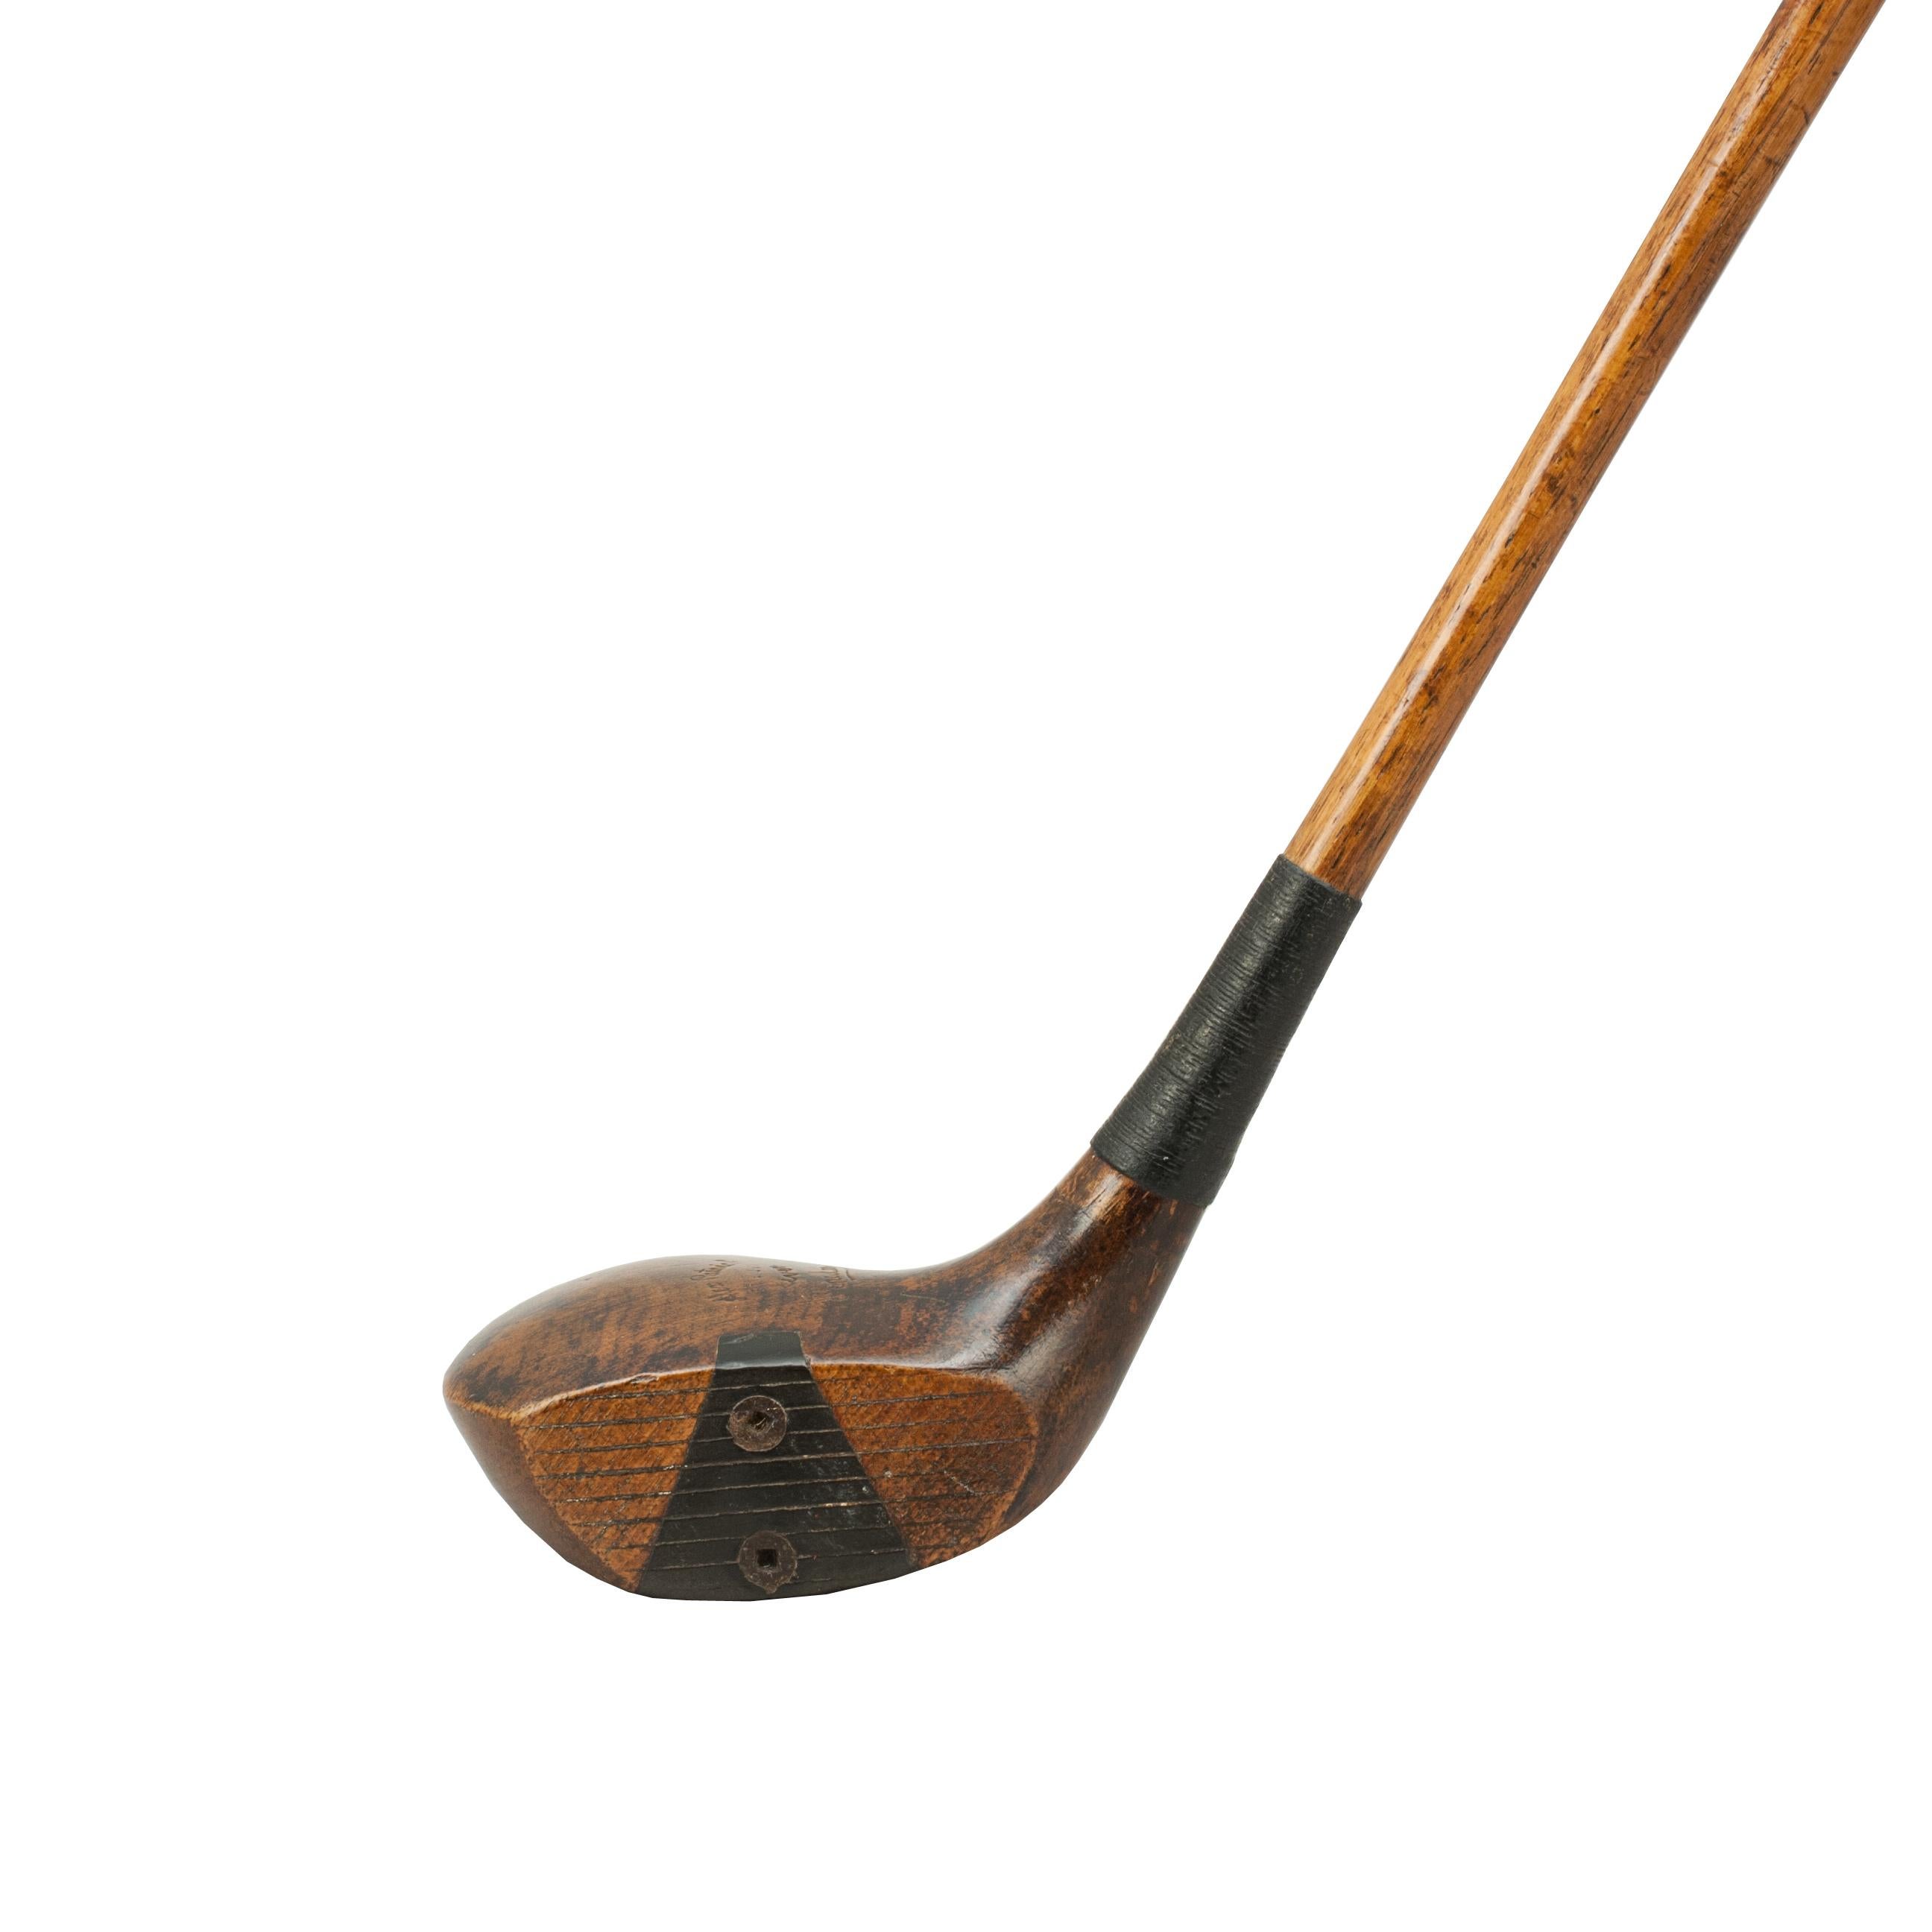 Antique golf club, hickory shafted driver by Alex Patrick of Leven.
A good original persimmon wood socket head brassie with hickory shaft and new leather grip. The head marked 'Alex Patrick, Est. 1847, Leven, Popular'. The club head has lead weight